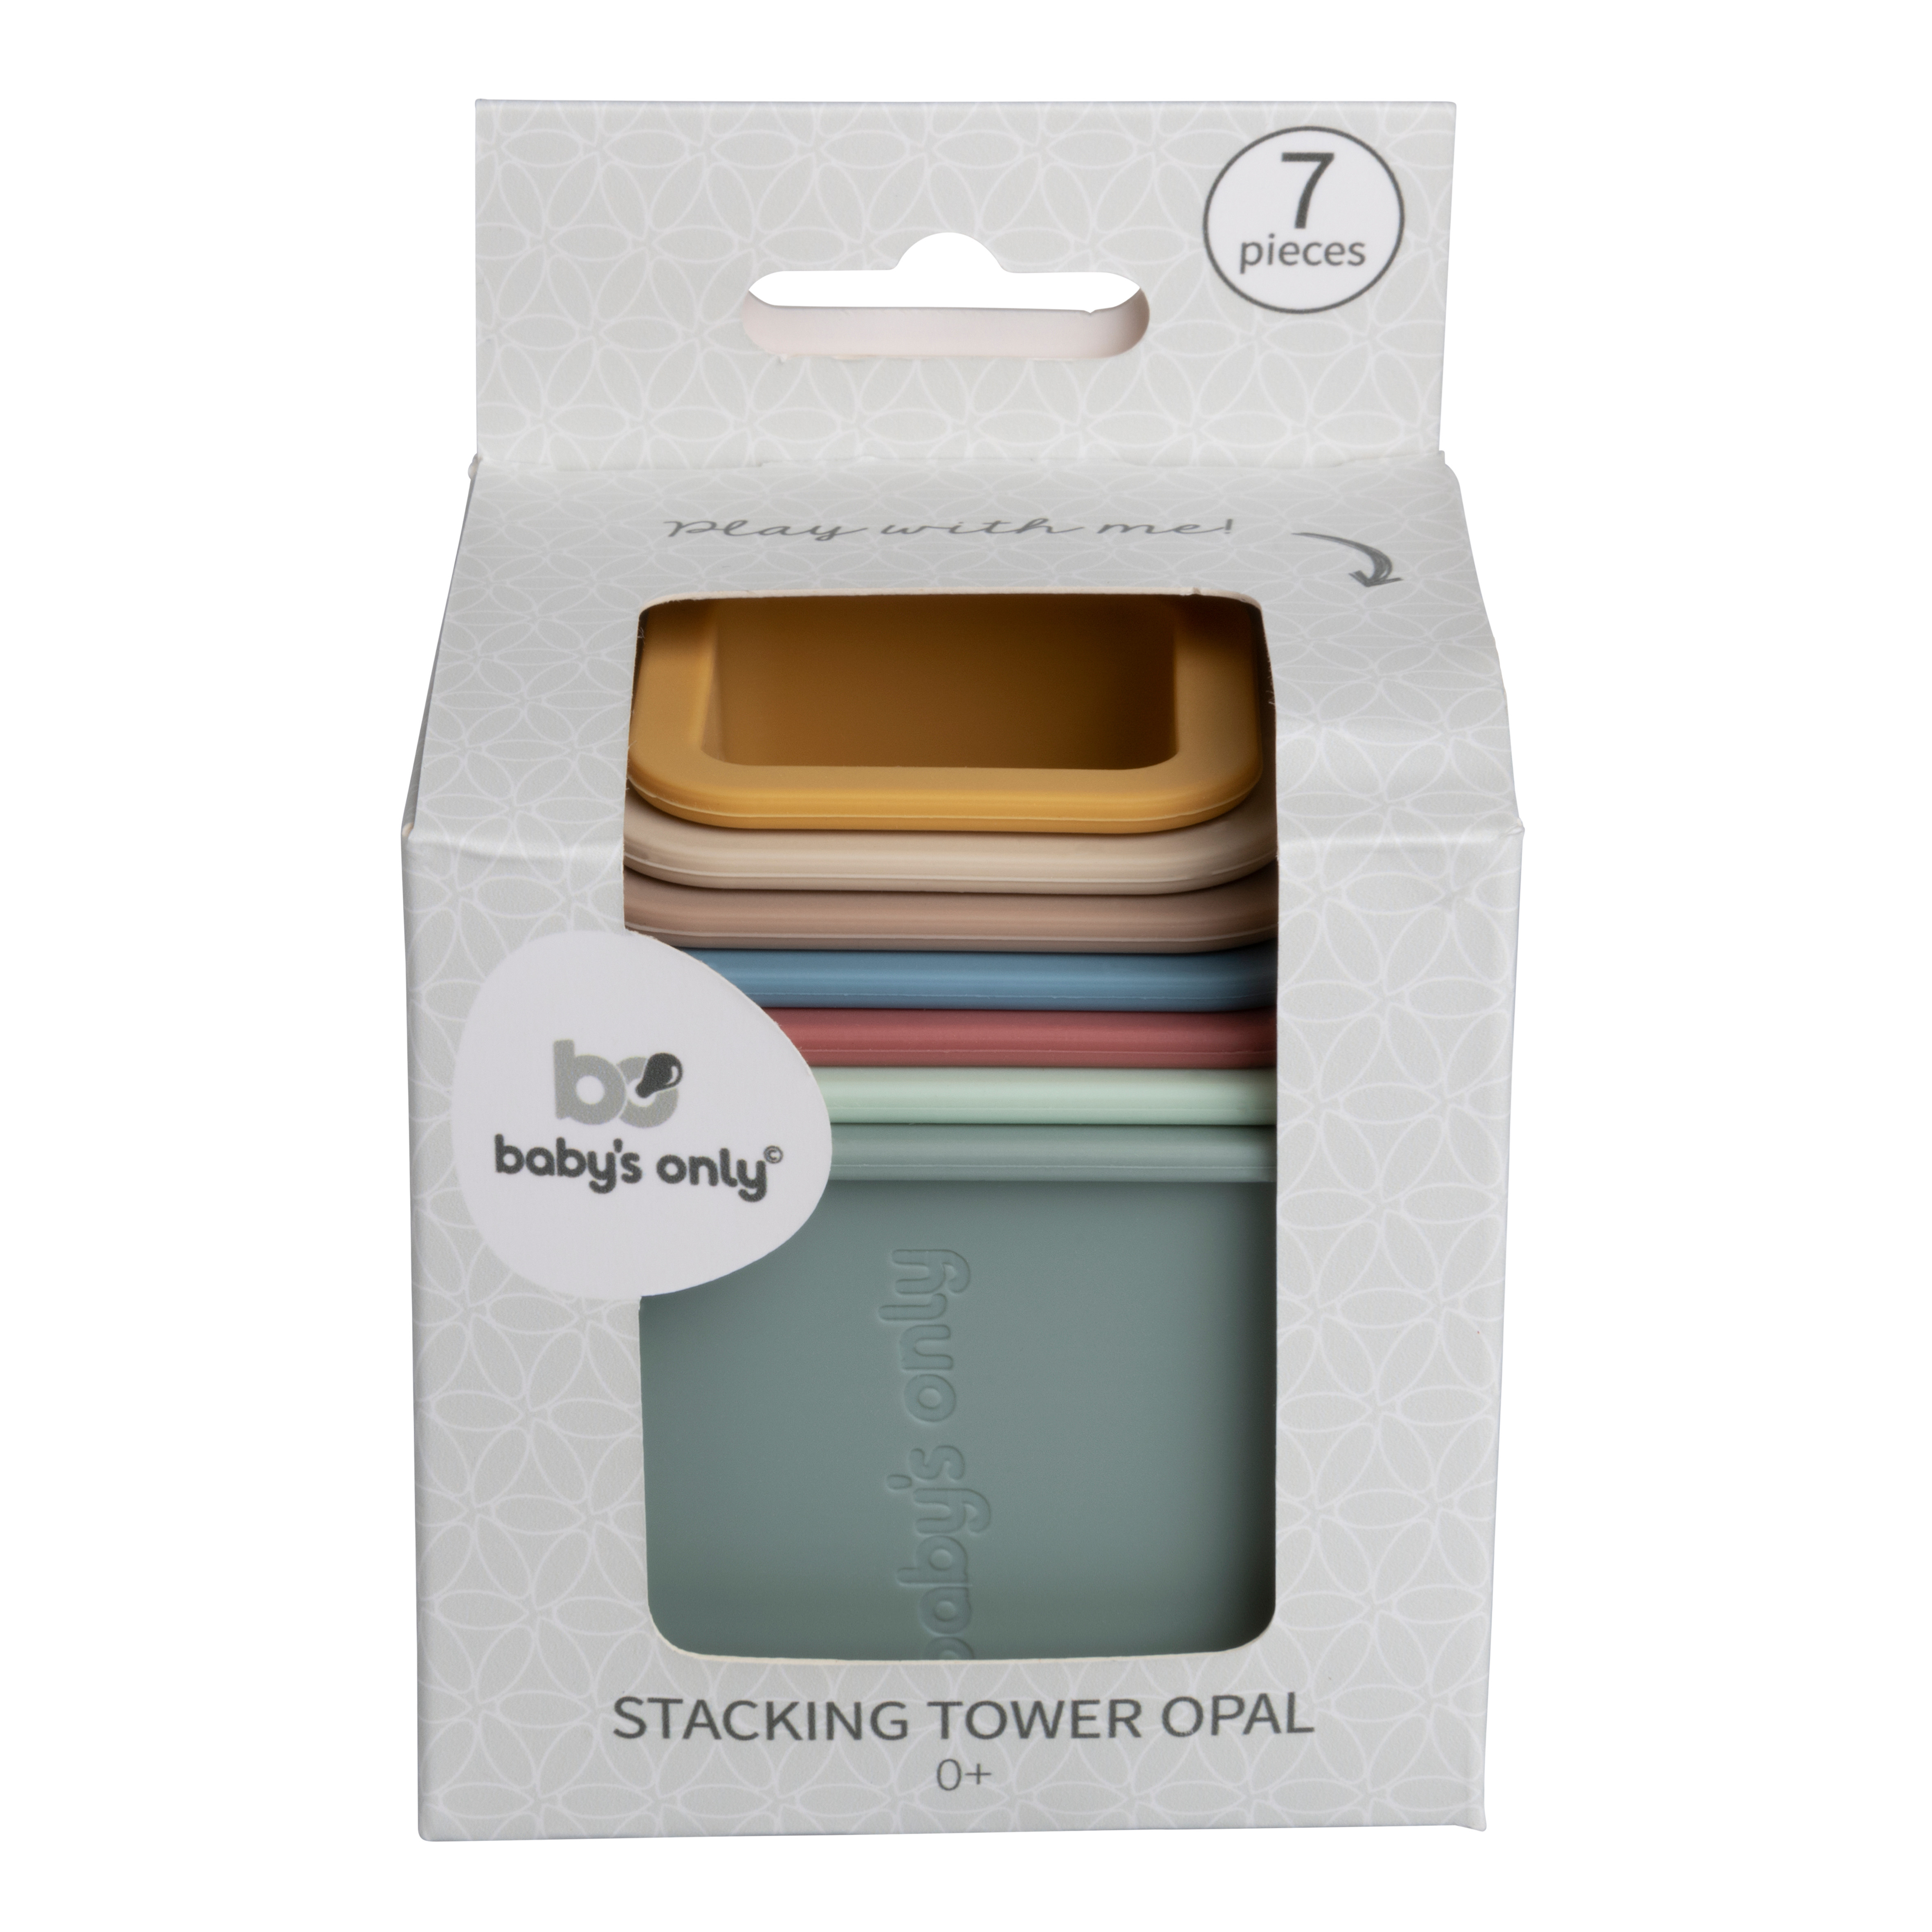 Stacking tower opal